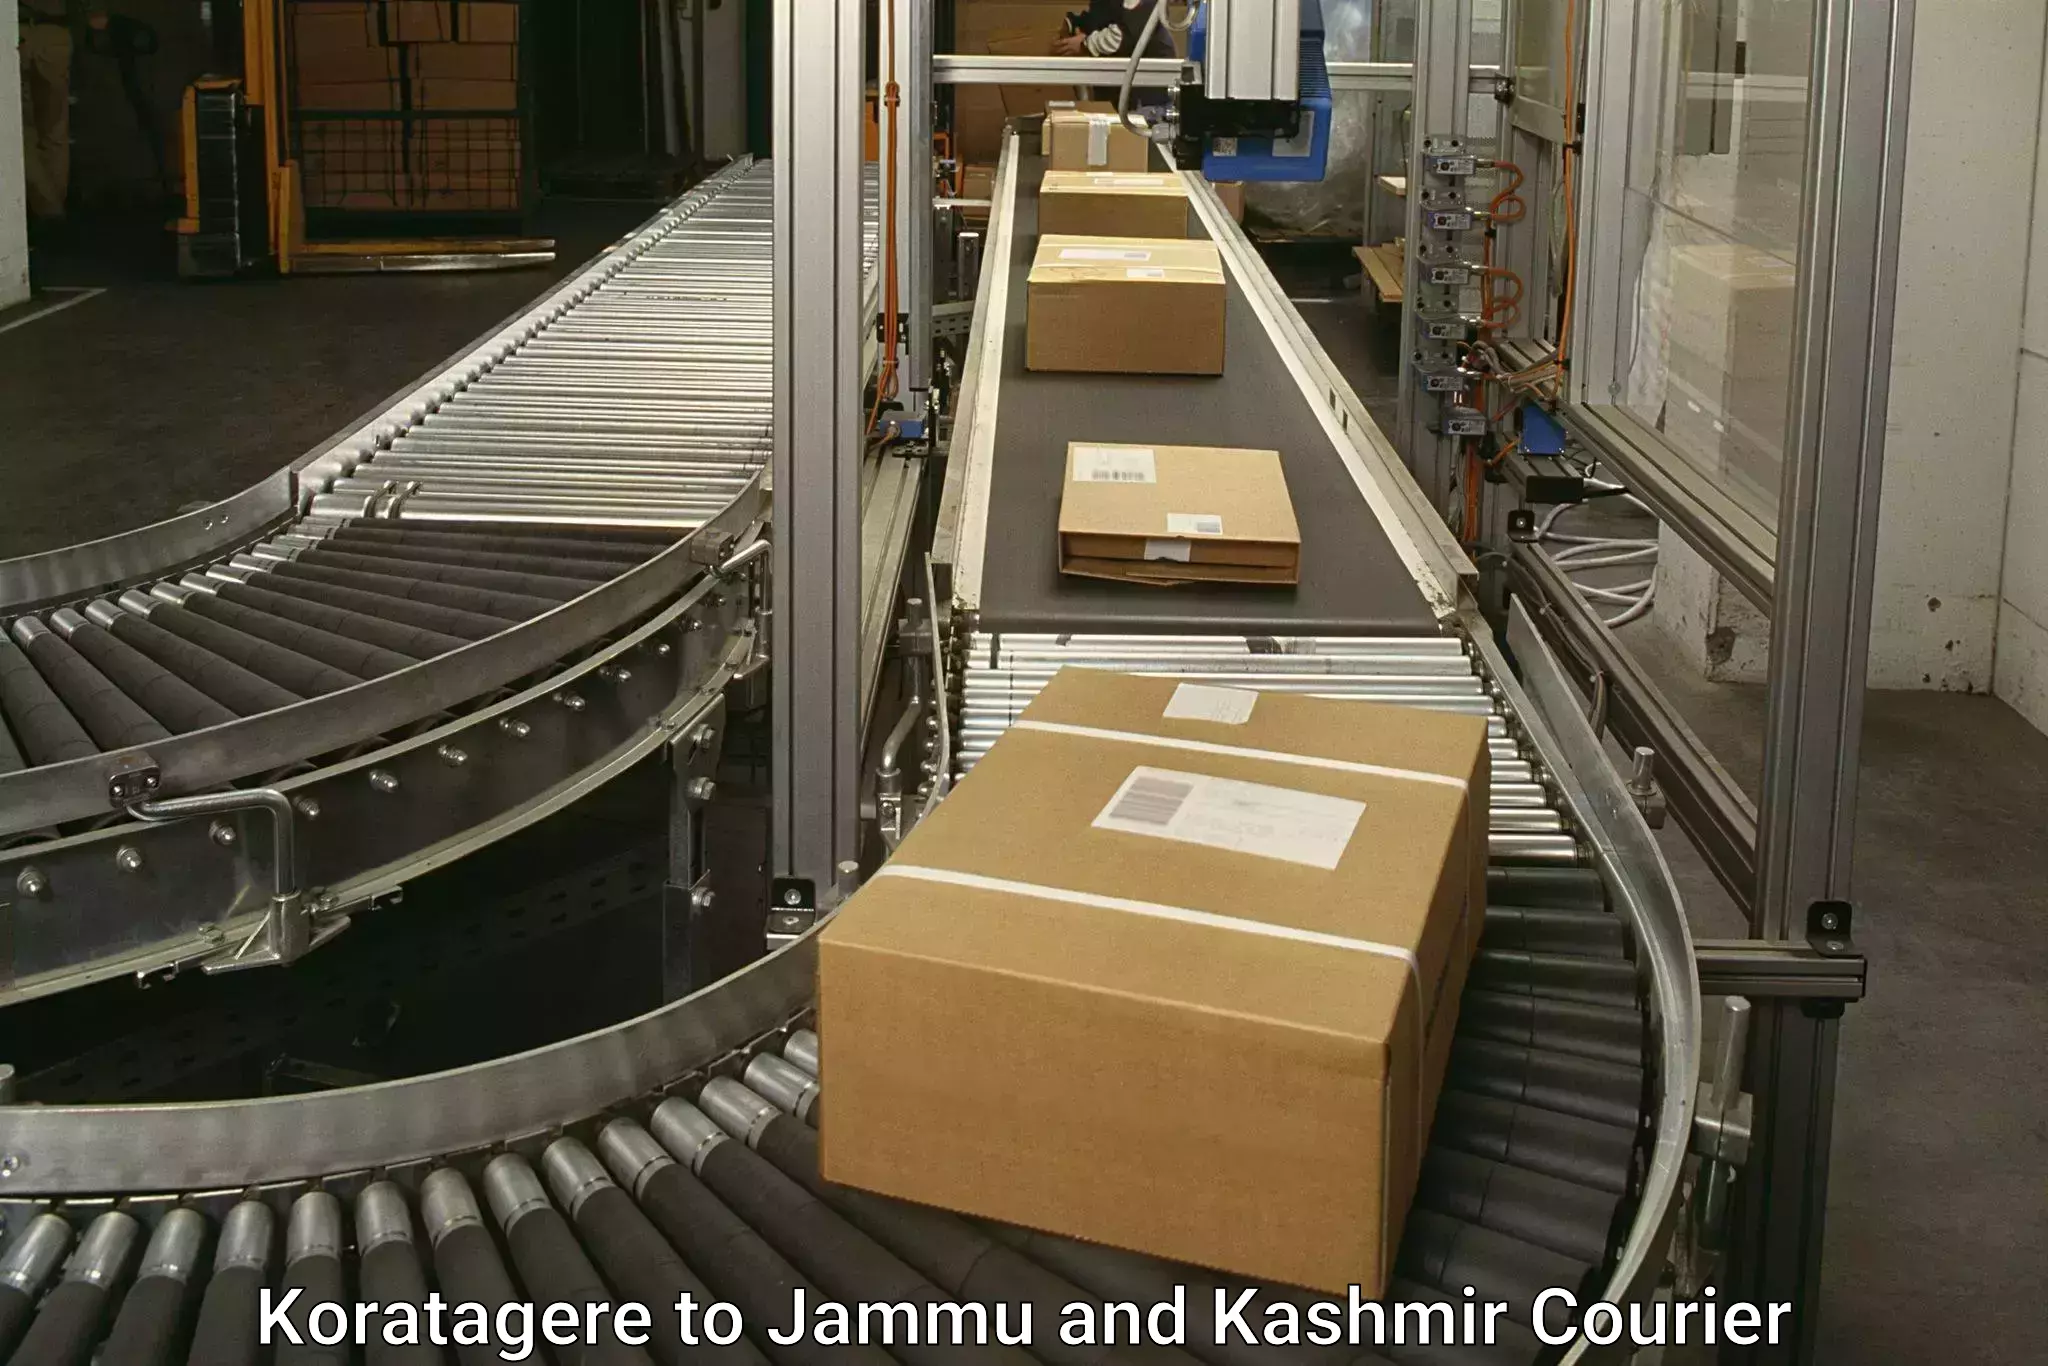 Courier app Koratagere to Jammu and Kashmir